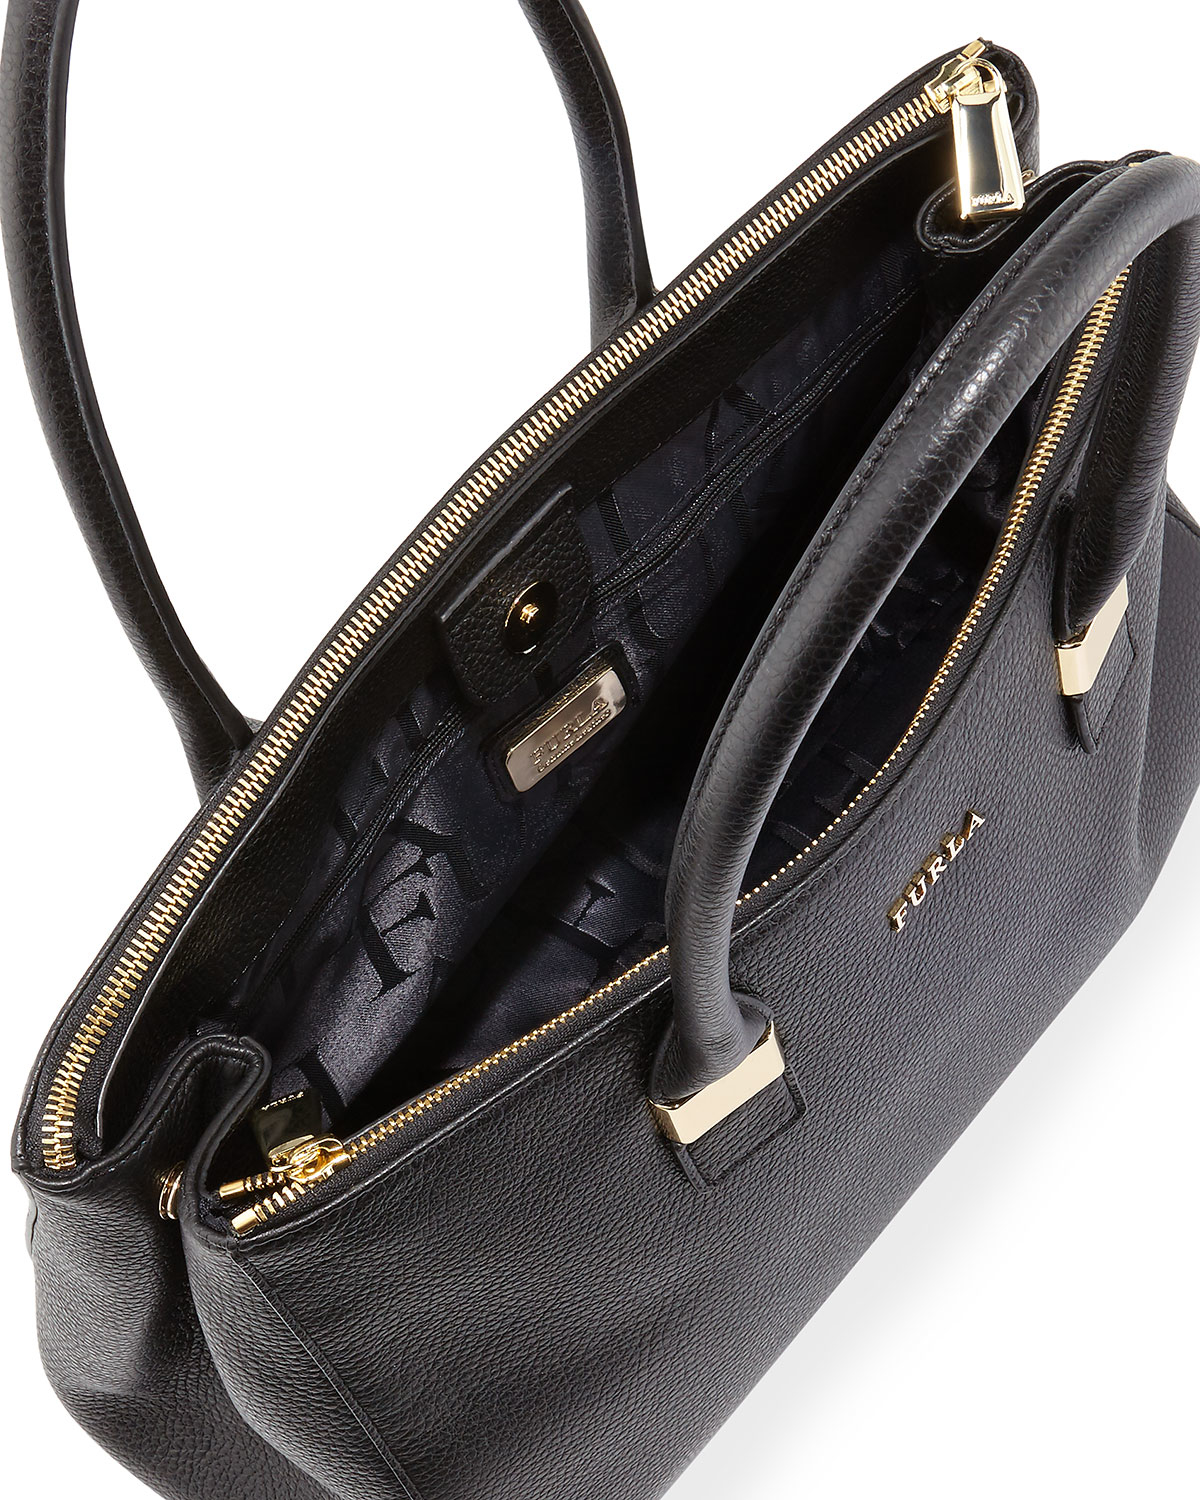 replica chloe shoes - Furla Amelia Large Leather Tote Bag in Black (ONYX) - Save 29% | Lyst